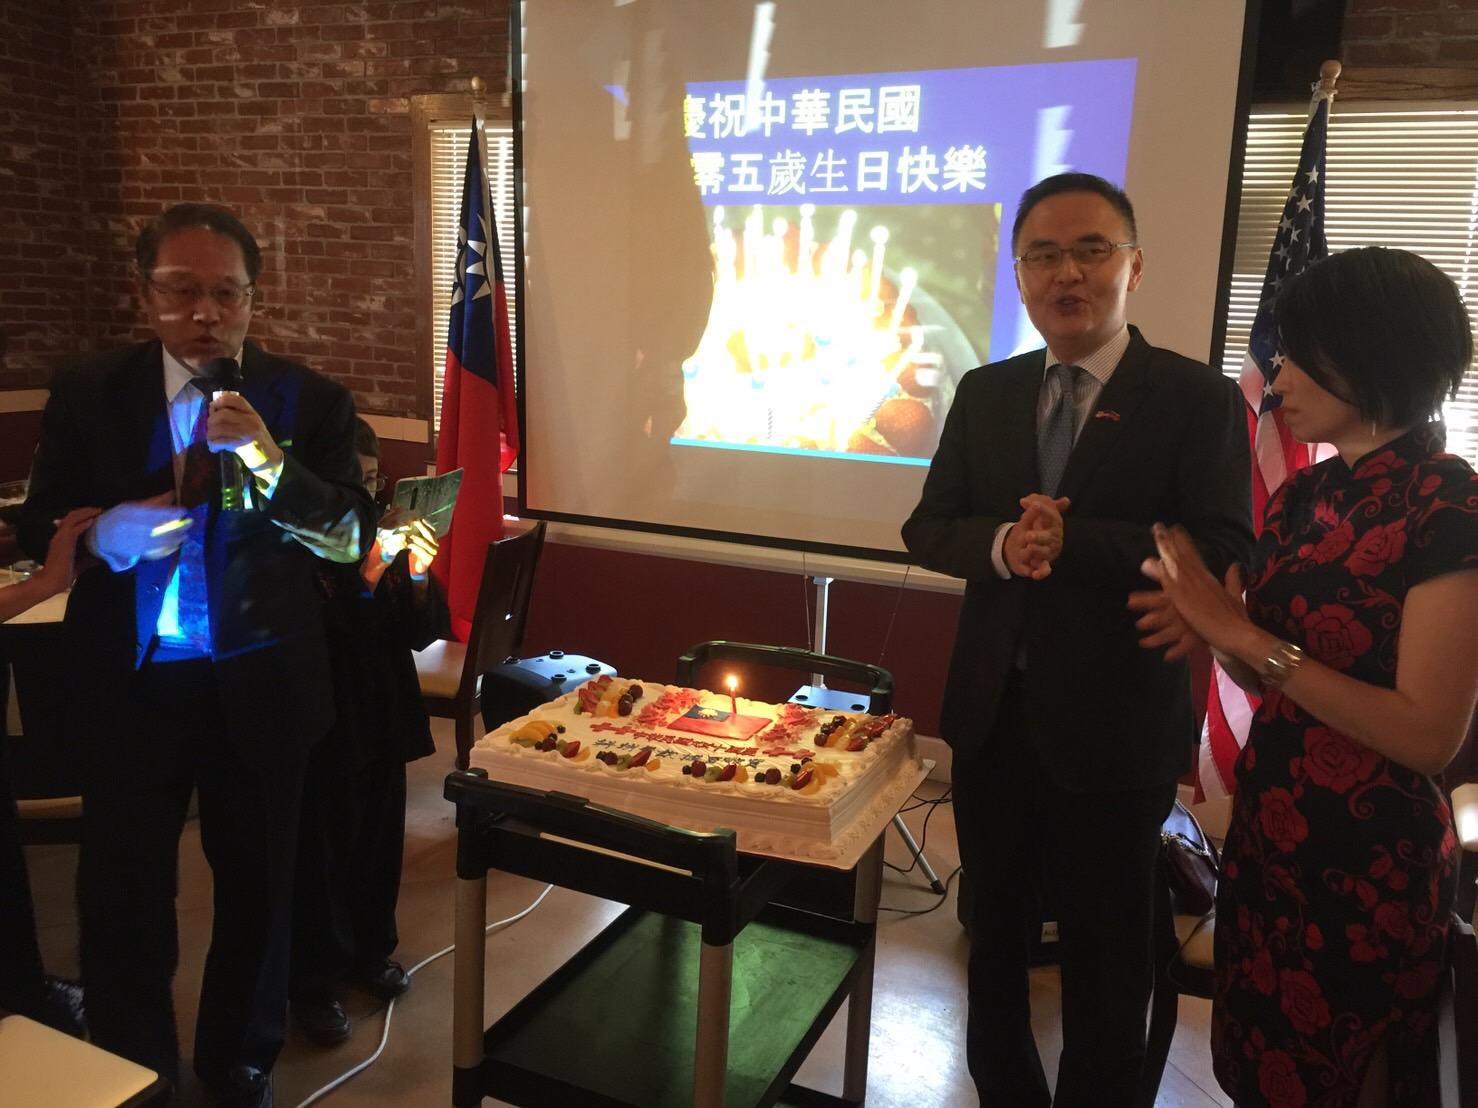 Director General and Mrs. Jerry Chang were invited to cut the National Day cake